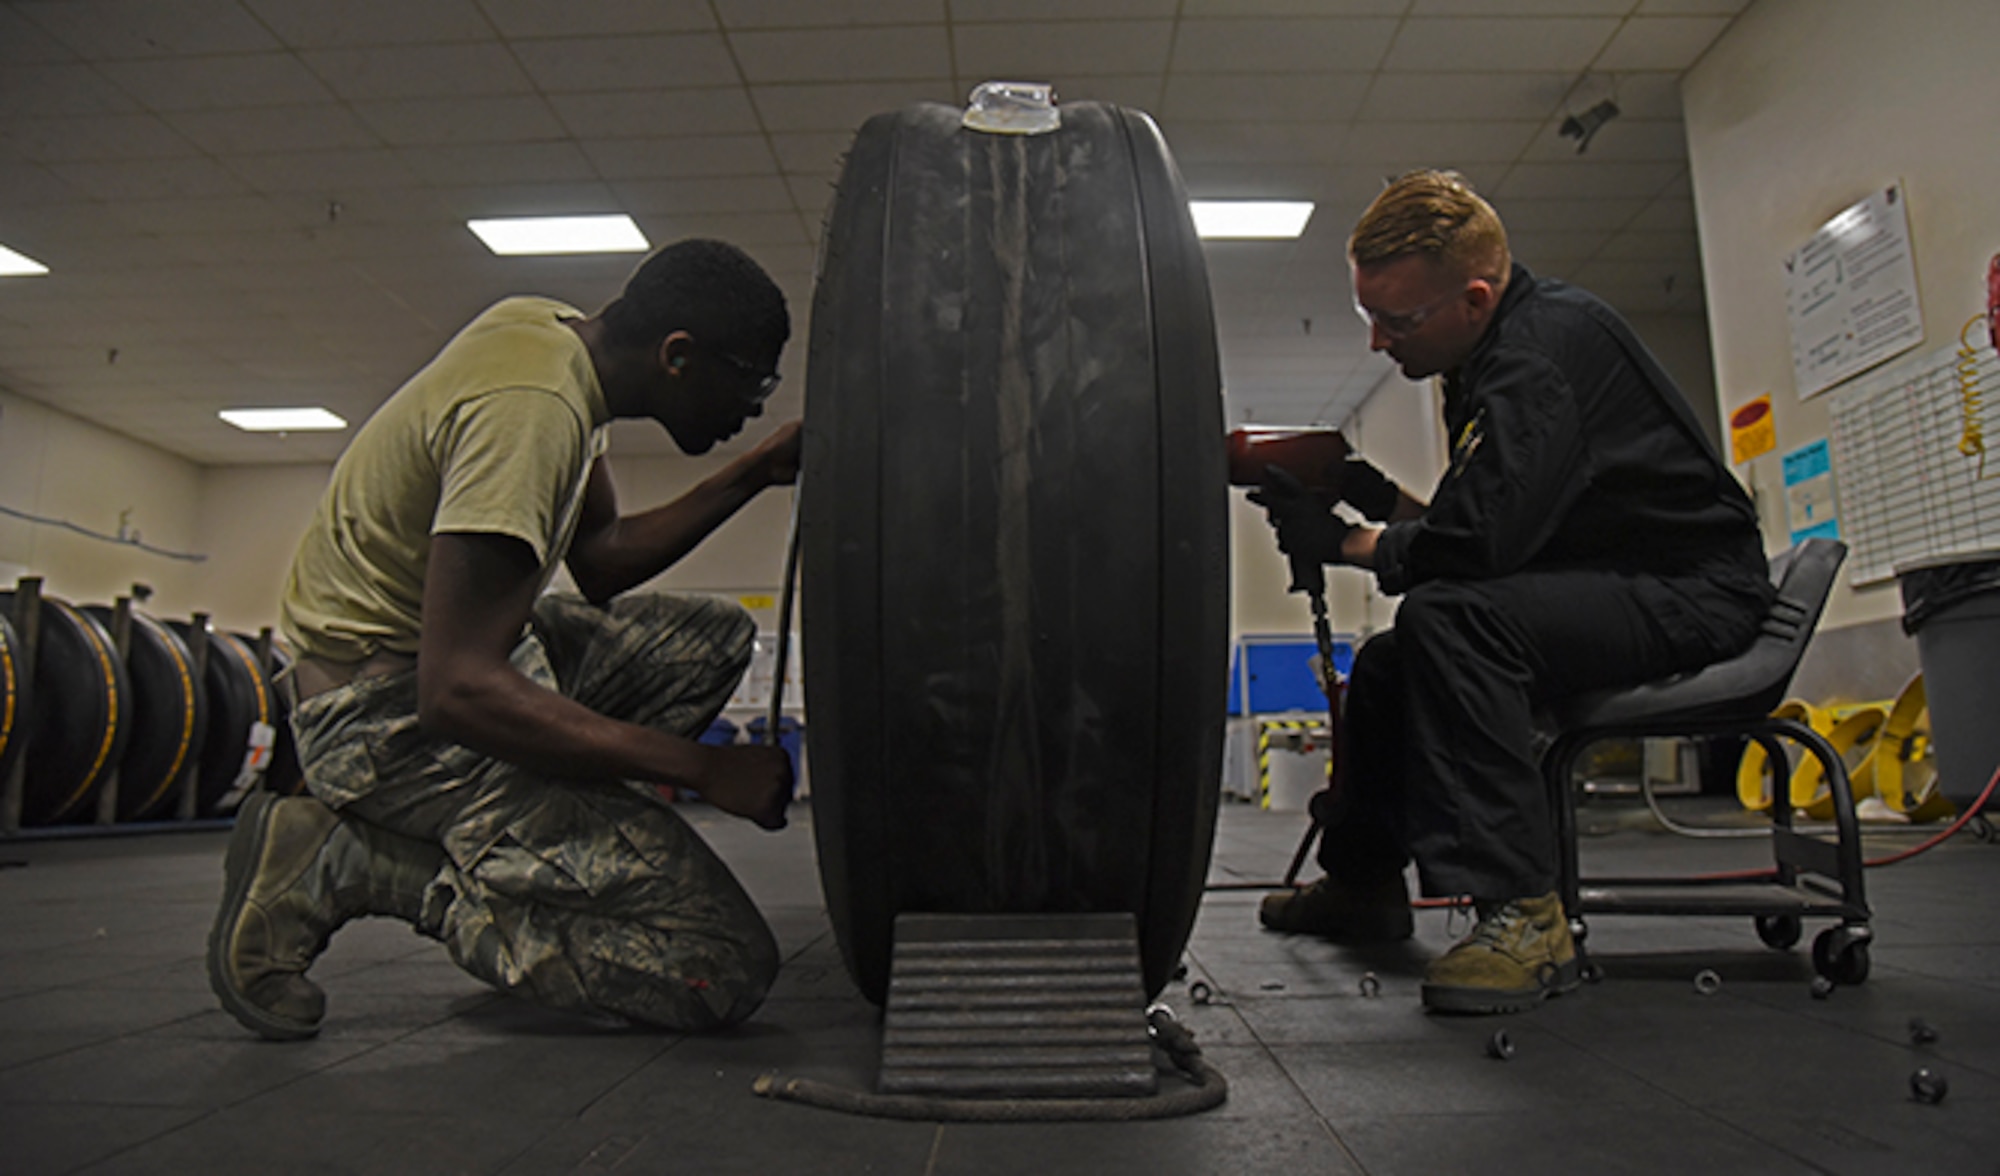 Airman 1st D’Andre Davis, 92nd Maintenance Squadron aerospace repair apprentice, assists in break down of a tire with Airman 1st Class Cody Mathews, 92nd MXS aerospace repair journeyman, at Fairchild Air Force Base July 22, 2016. The aerospace repair shop is tasked with wheel and tire assembly for all KC-135 Stratotanker operations within Pacific Air Force as well as KC-135 operations at Fairchild. (U.S. Air Force photo/Airman 1st Class Mackenzie Richardson) 